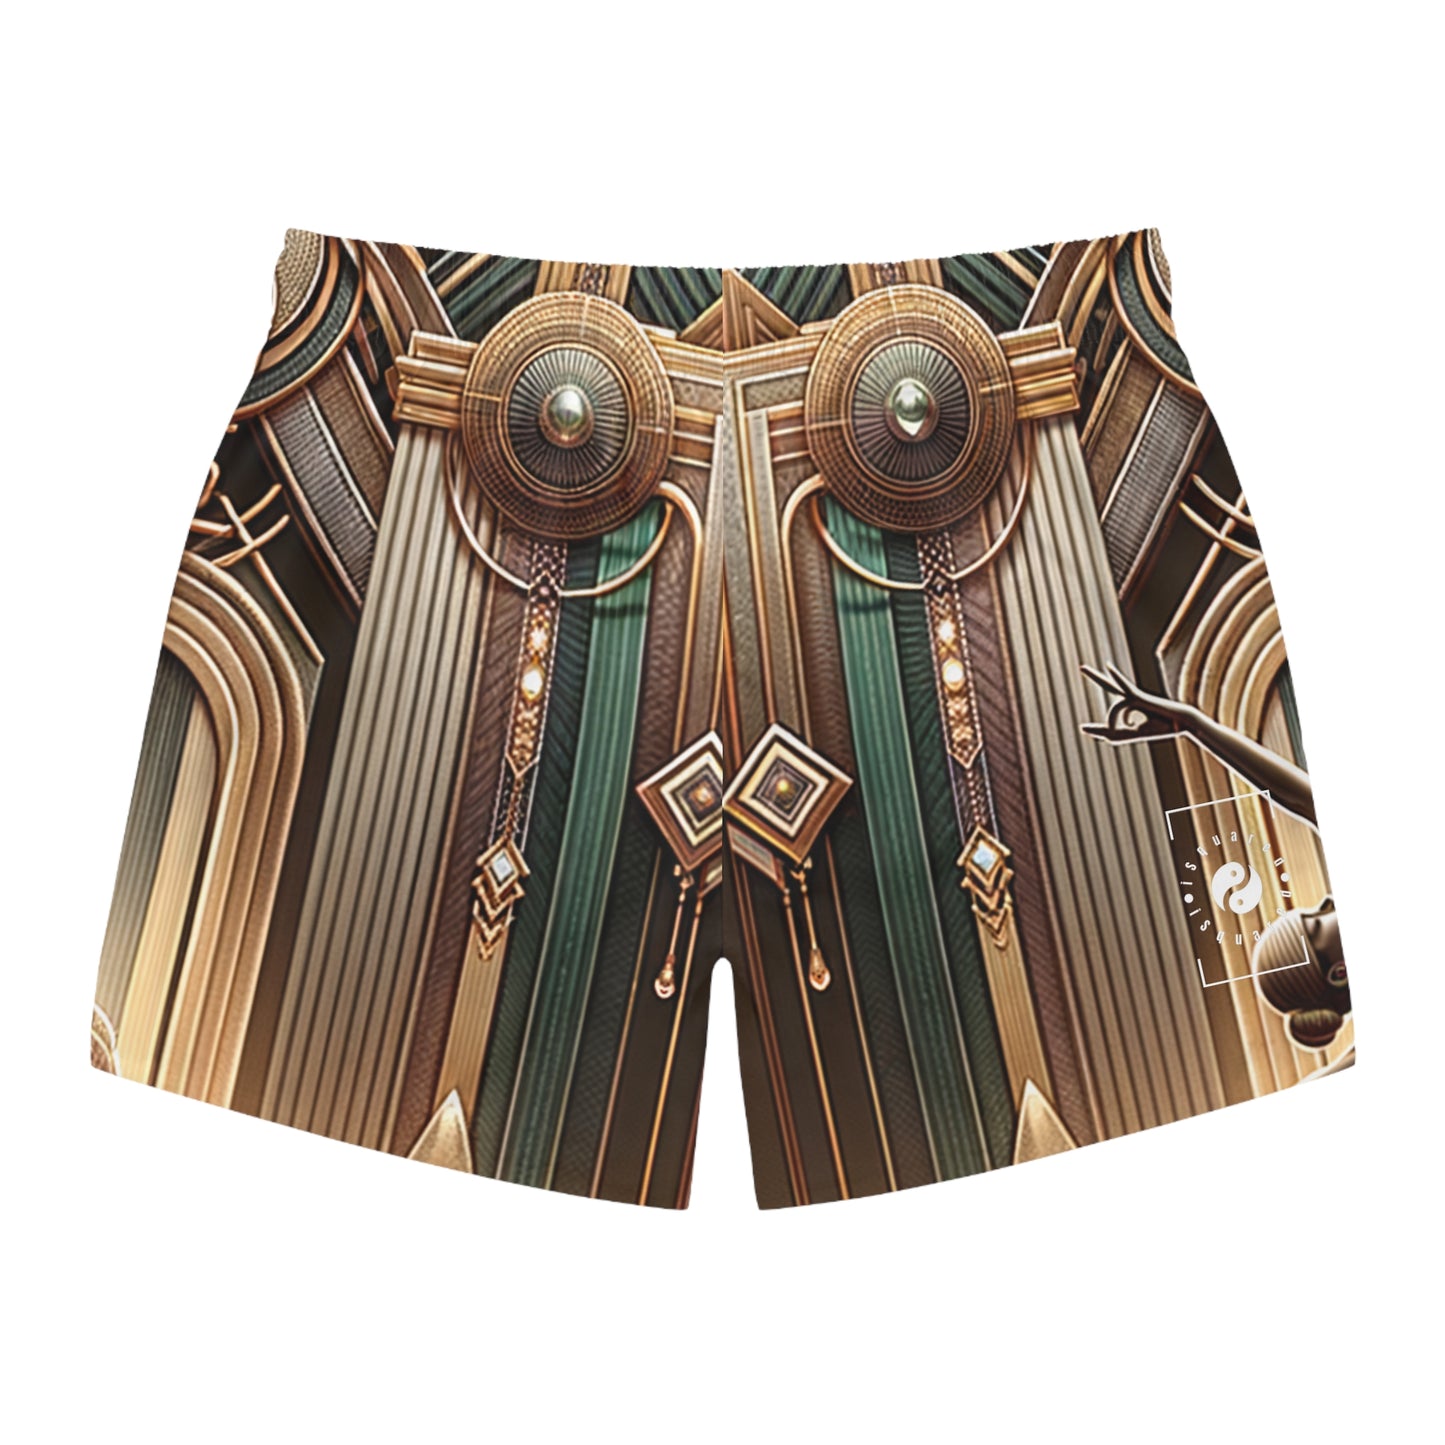 "Deco Serenity: A Fusion of Opulence and Zen" - Swim Trunks for Men